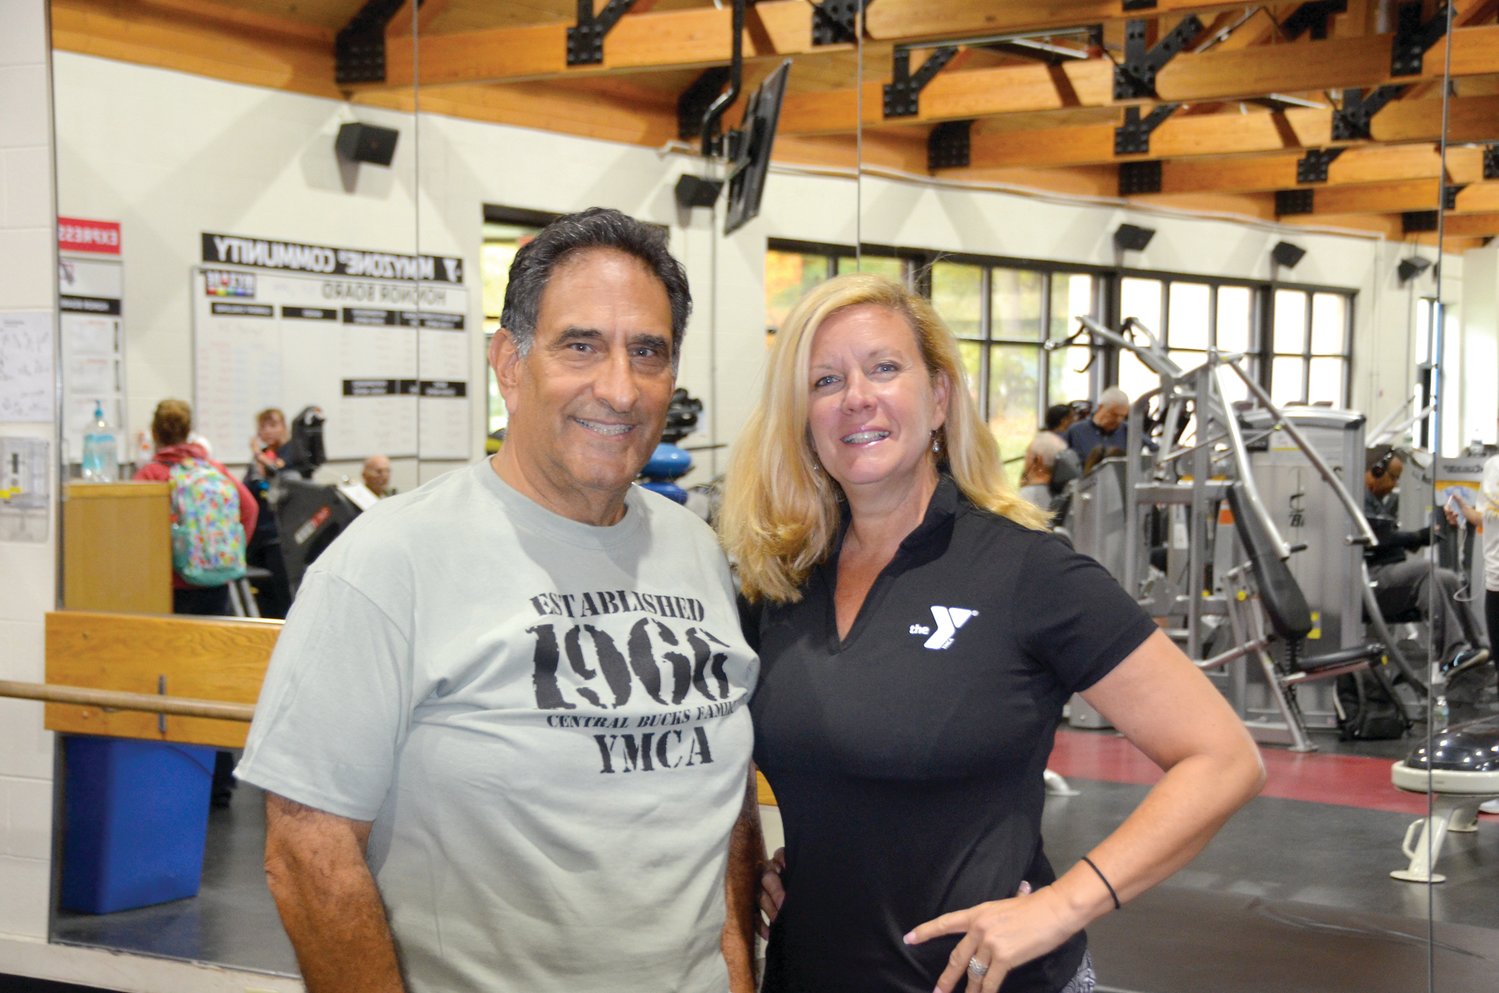 Bill Gruccio, a graduate of the Y’s THRIVE cancer wellness program in Doylestown, and his THRIVE trainer Vicki Ansari.